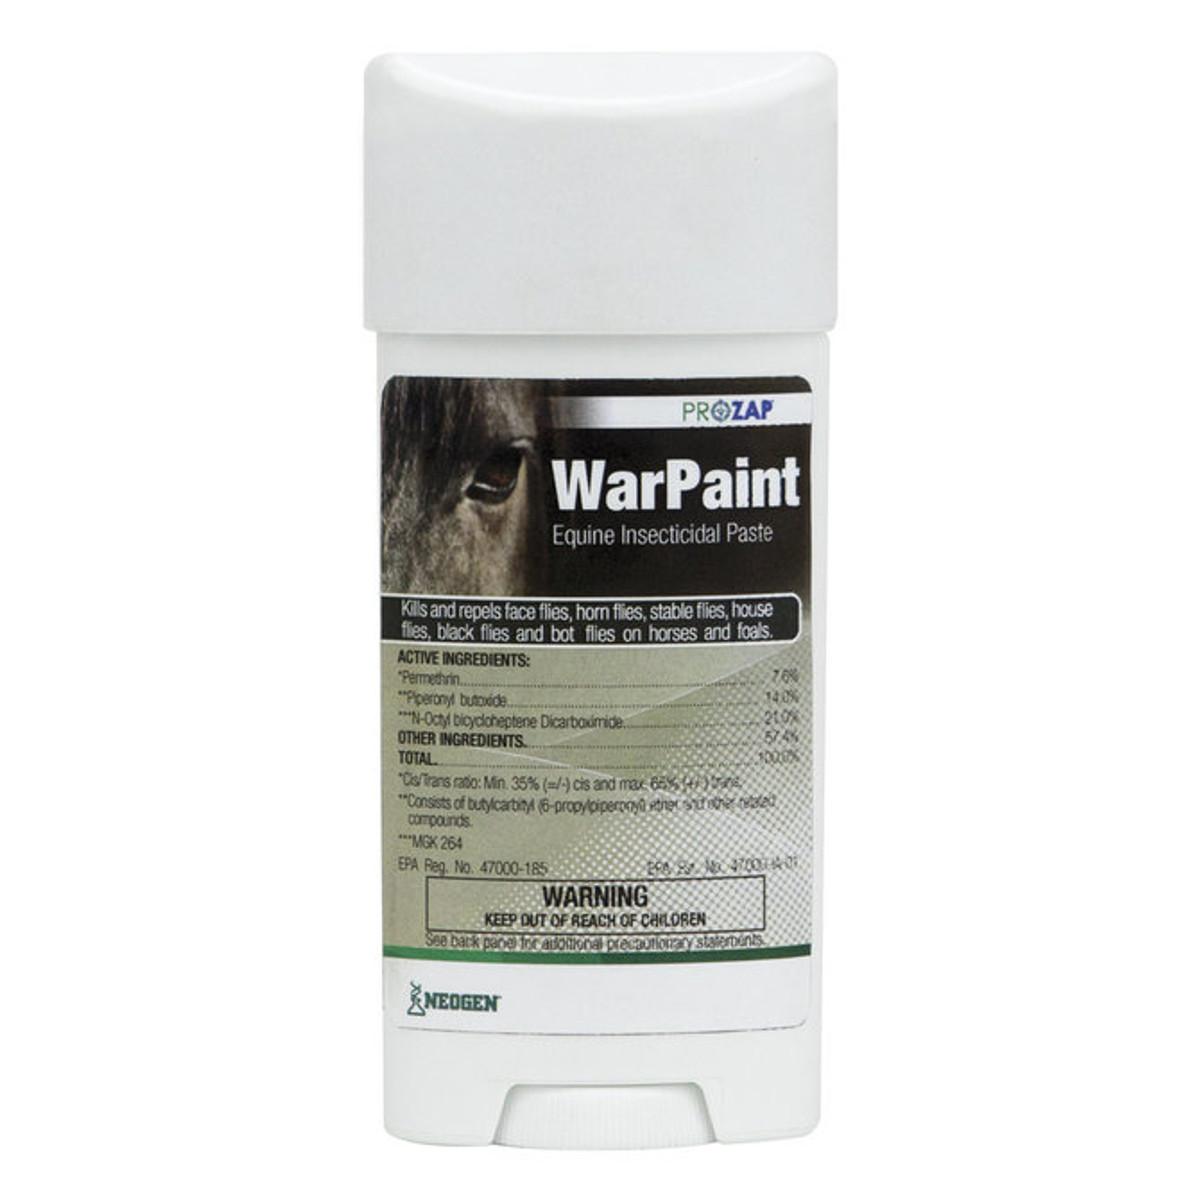 Prozap War Paint Insecticidal Paste for Horses